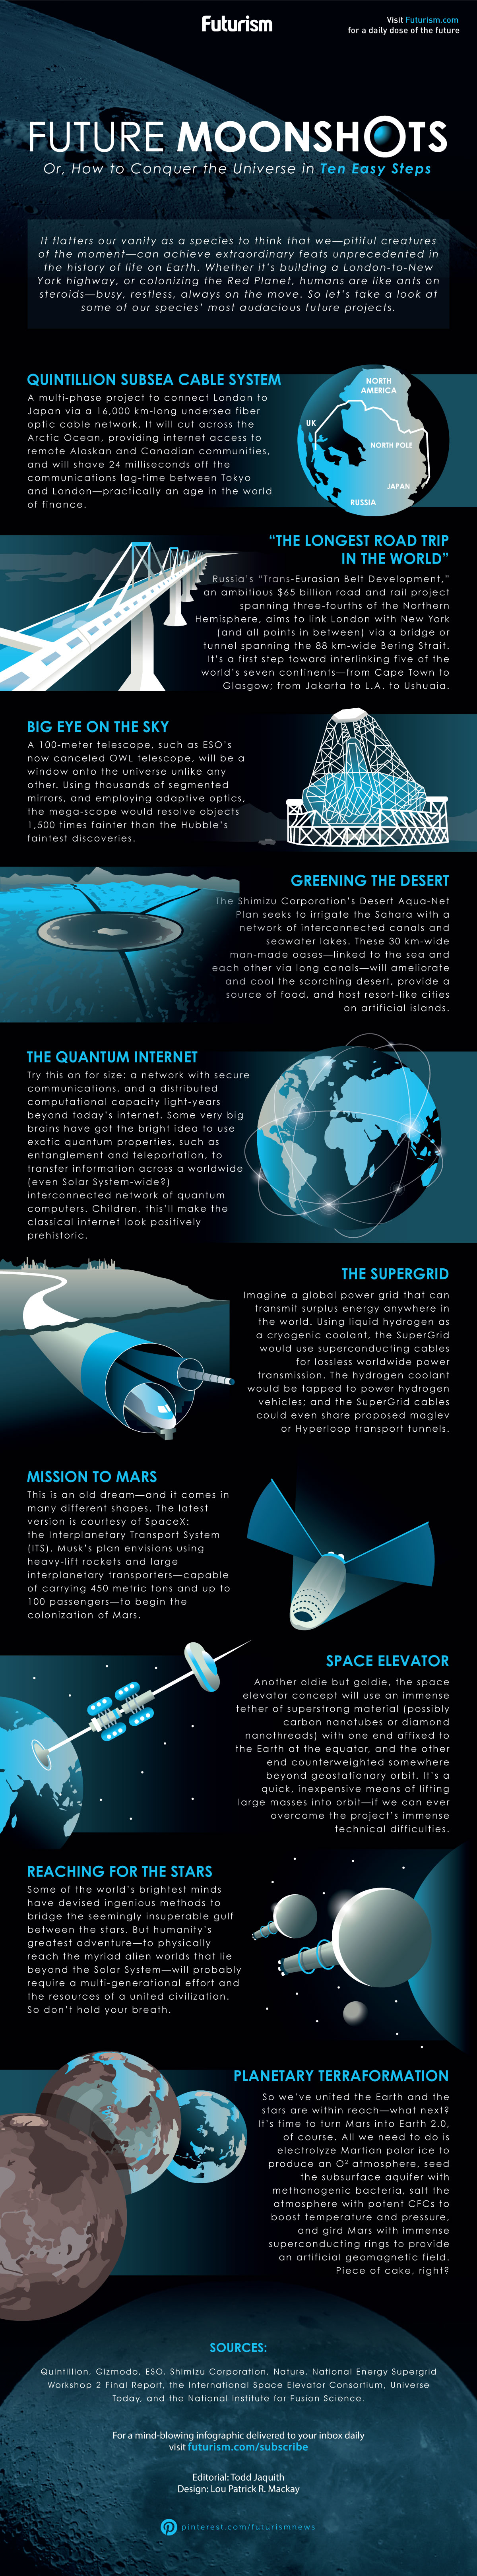 Moonshots: Man’s Quest to Transform Our Planet - Infographic